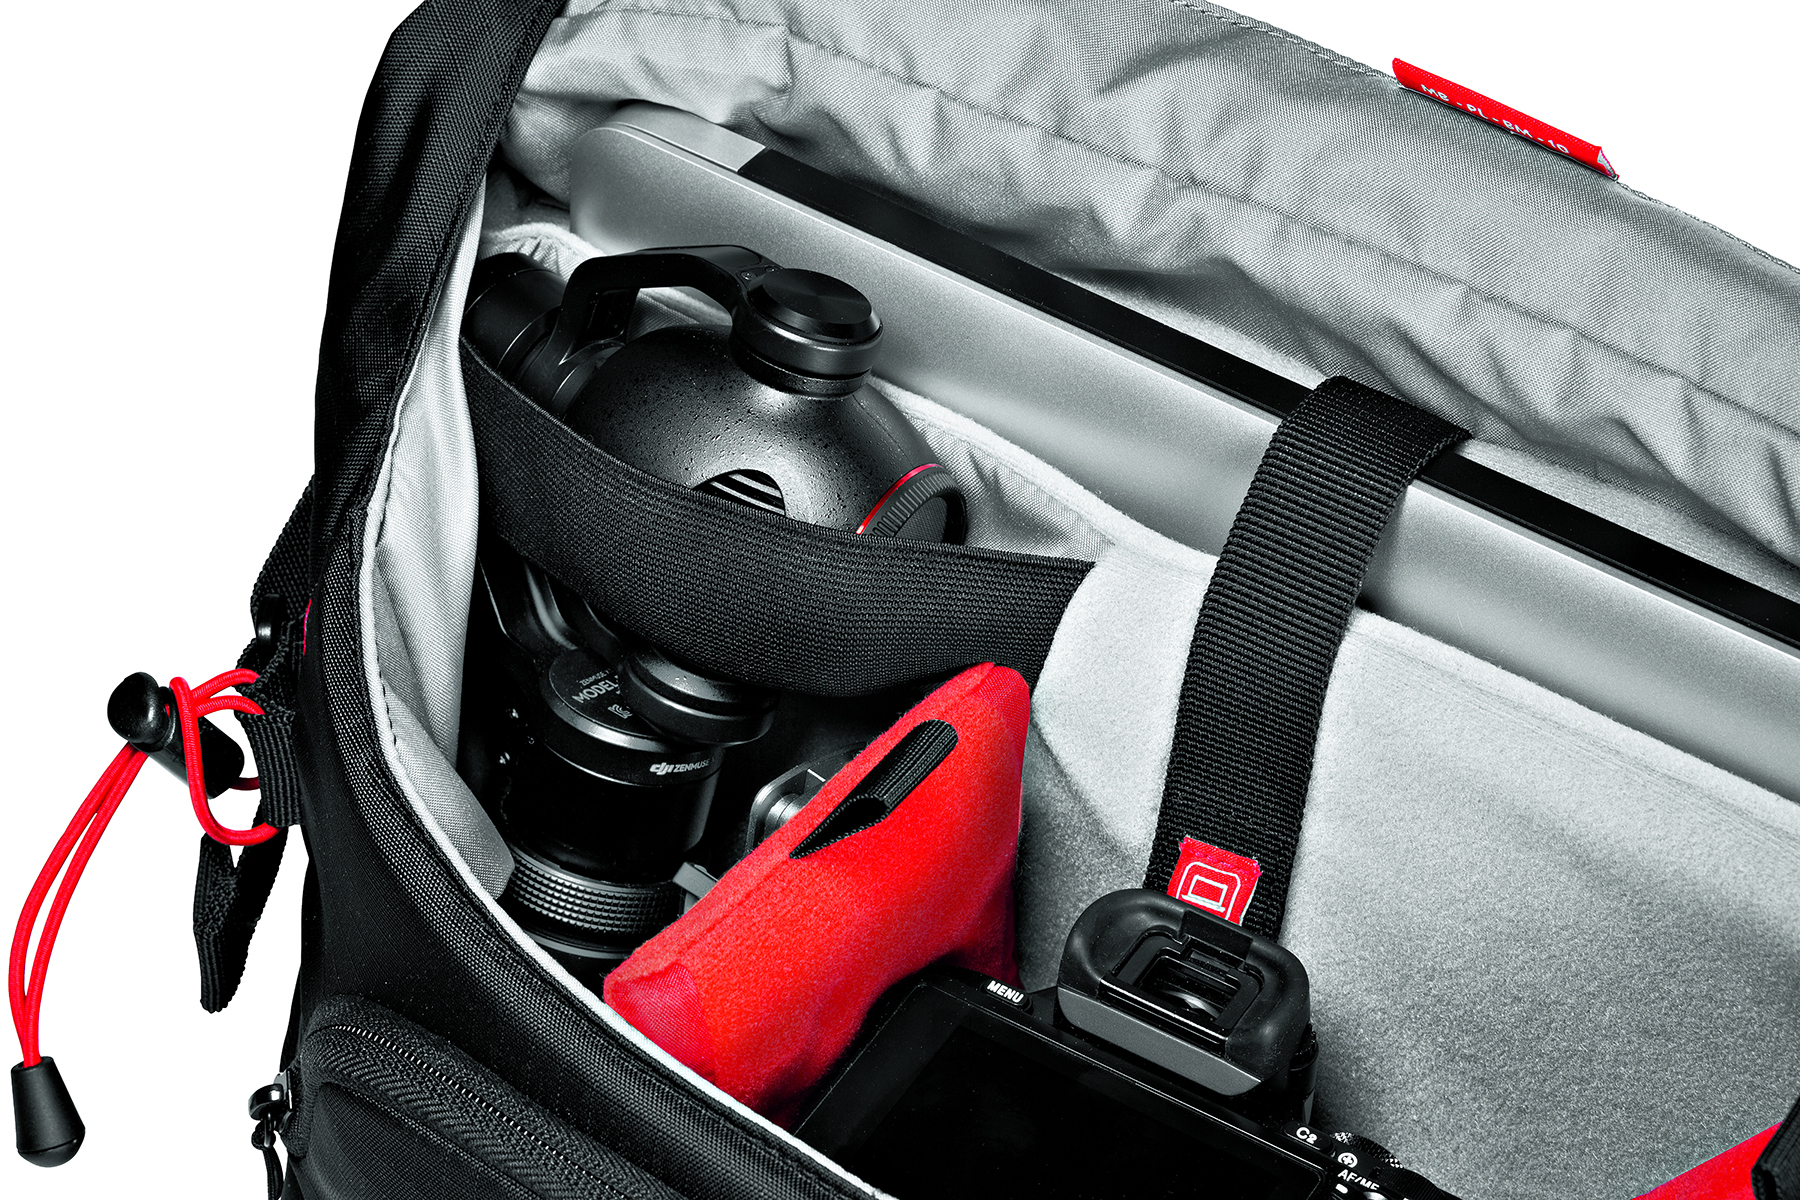 Manfrotto Offers Pro Light Bumblebee Camera Bag Family - The